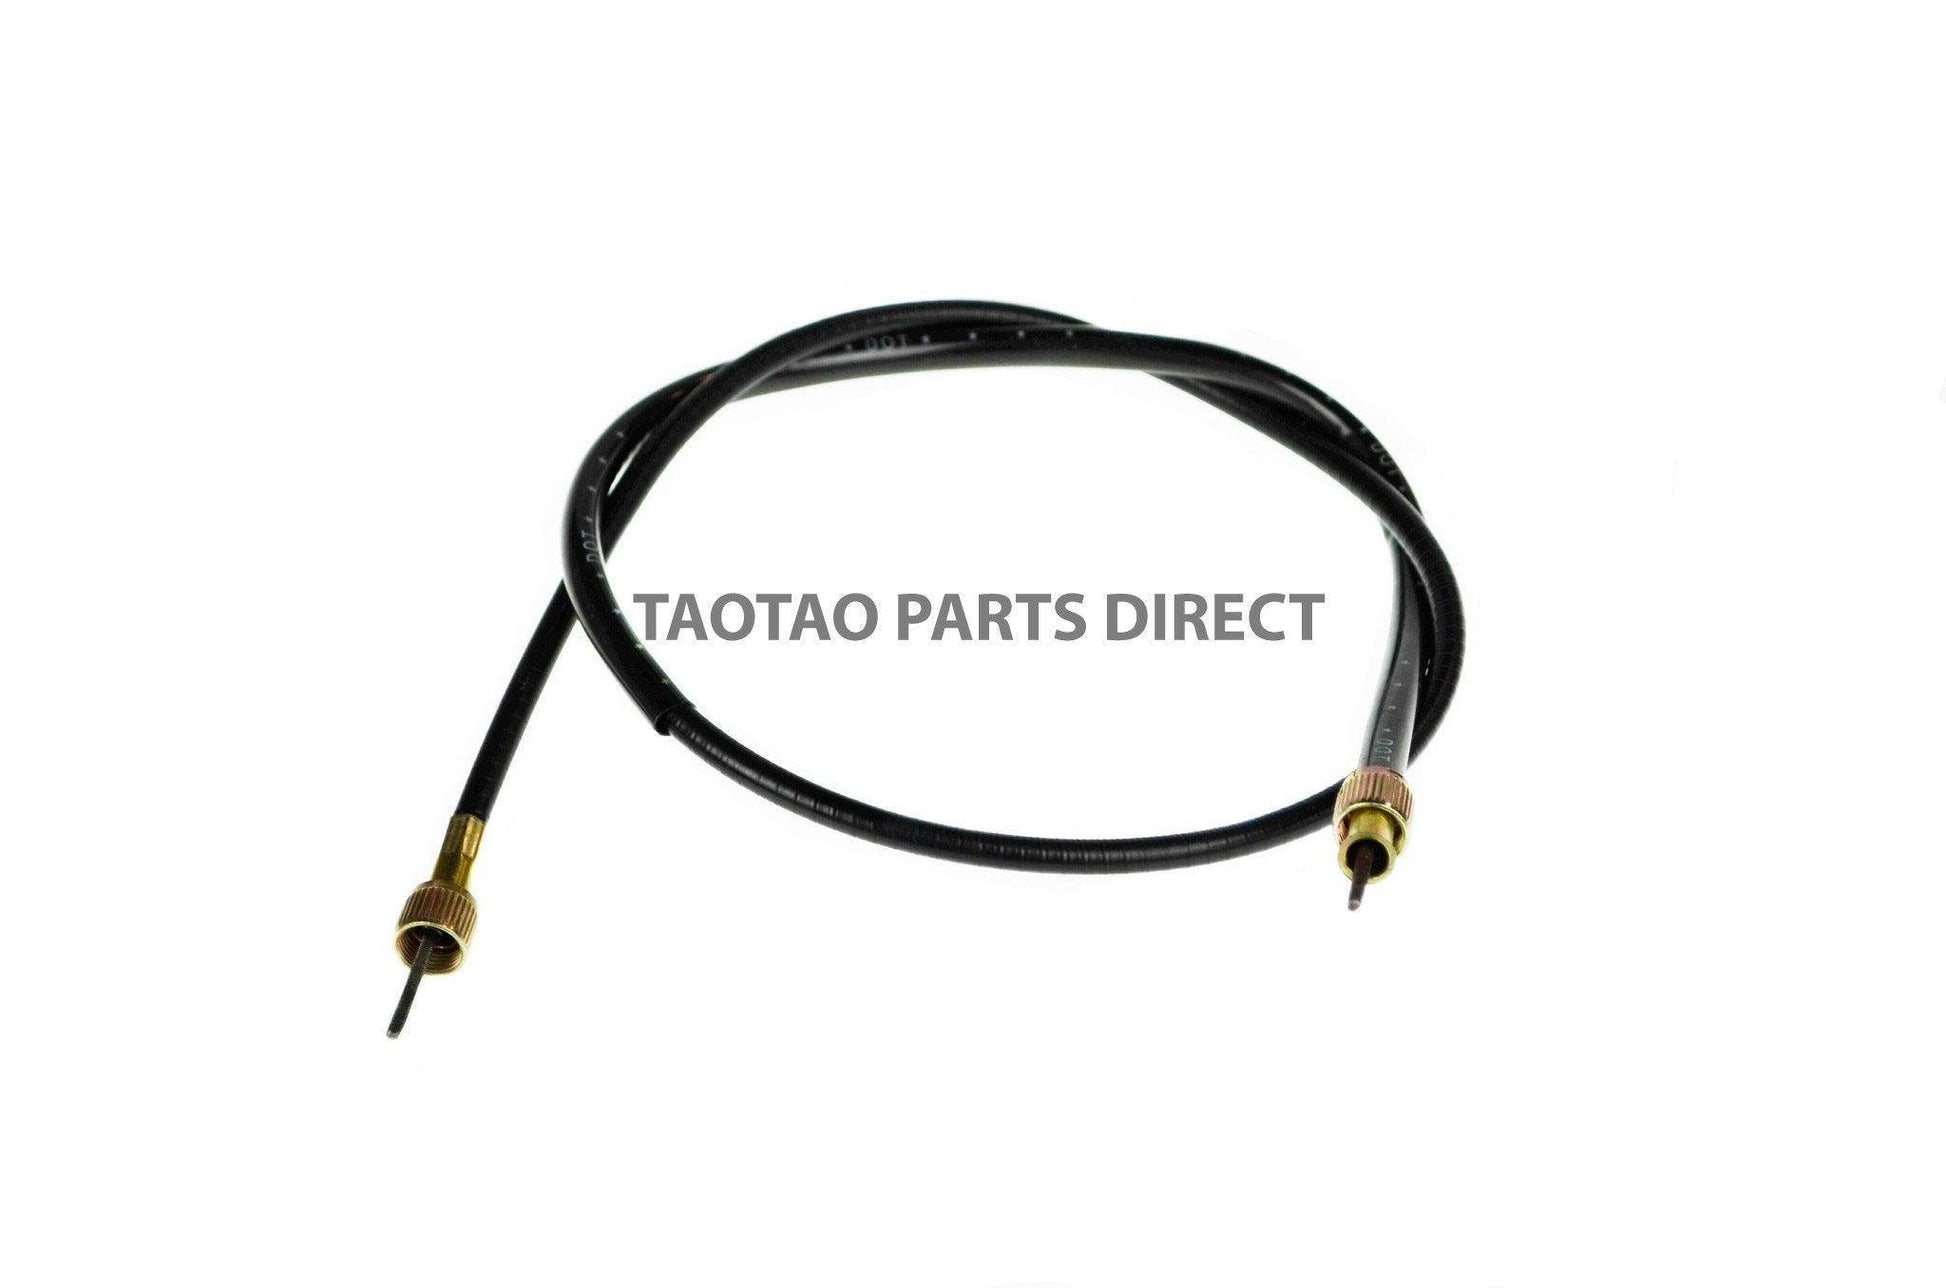 Thunder 50 Speedometer Cable - TaoTao Parts Direct